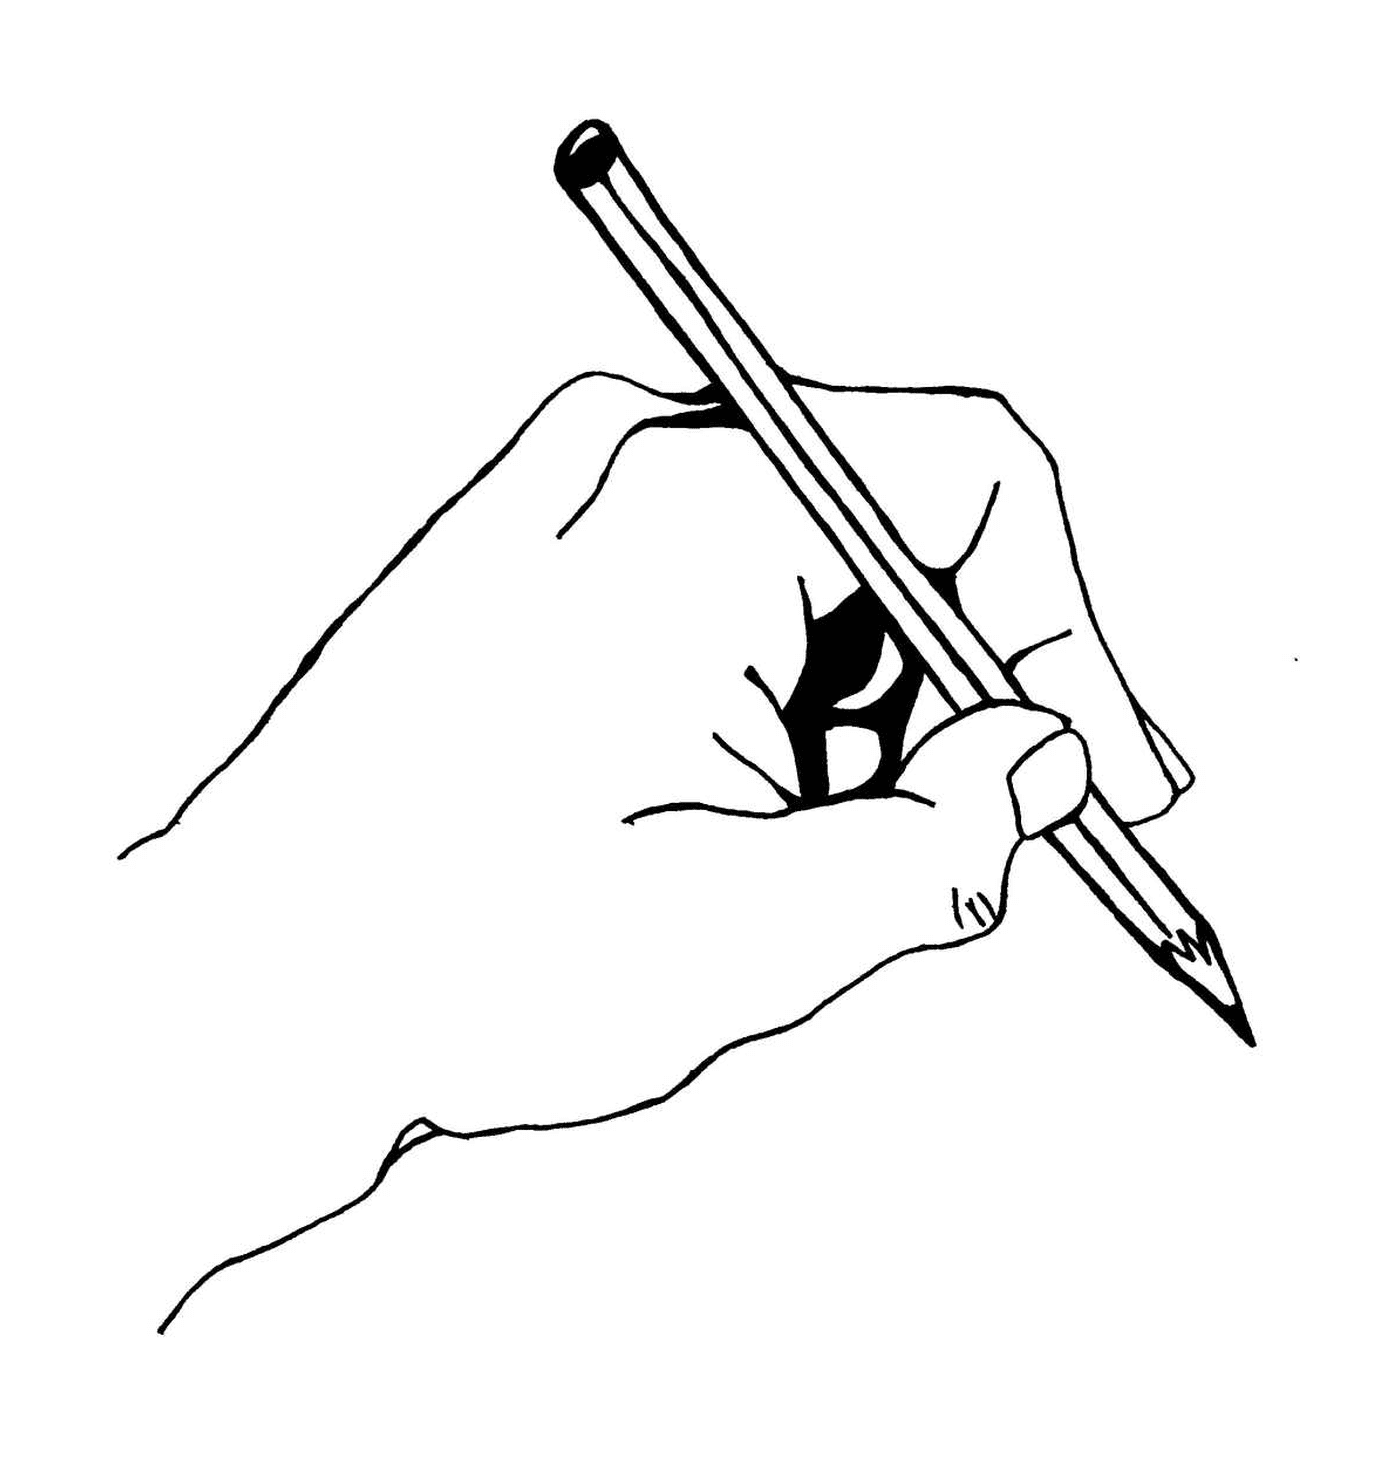  adult hand holding pencil 